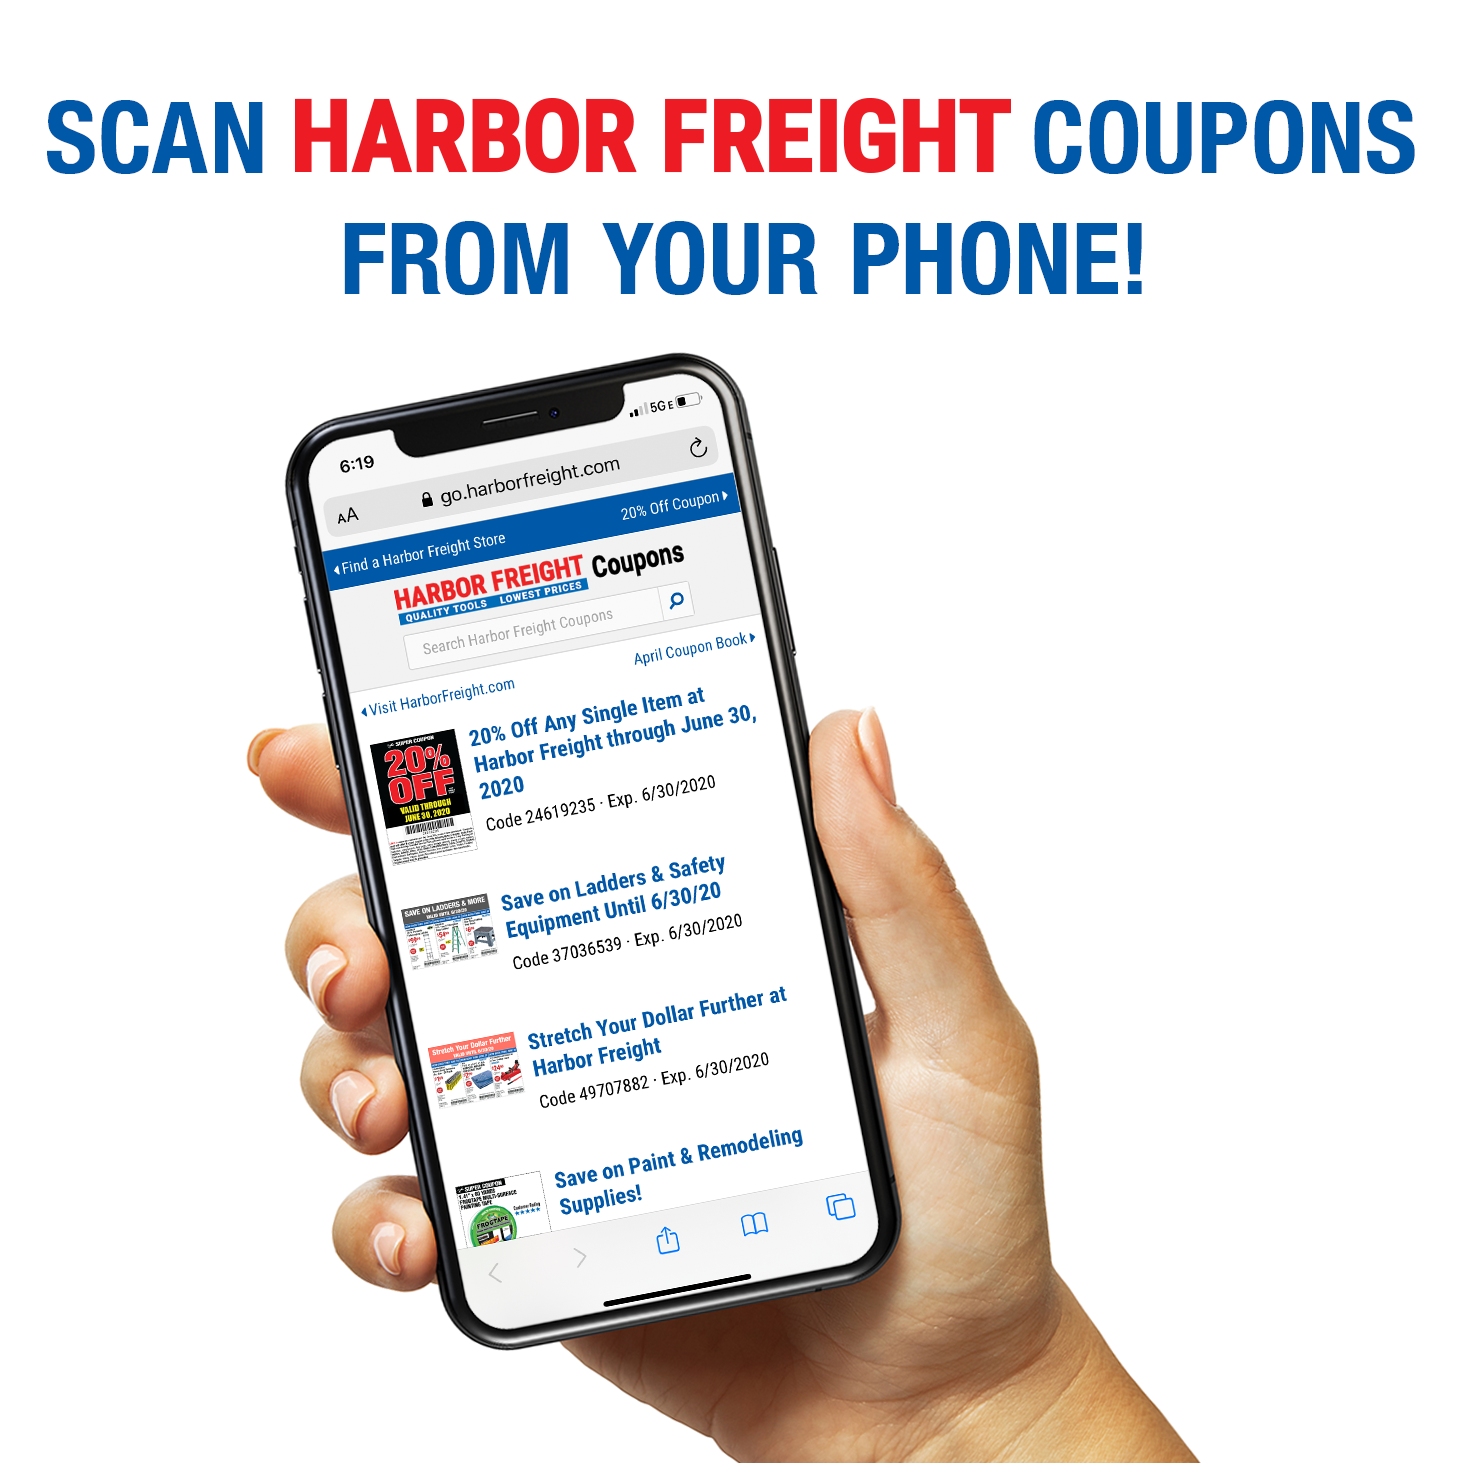 will harbor freight scan coupons from a mobile phone harbor freight coupons